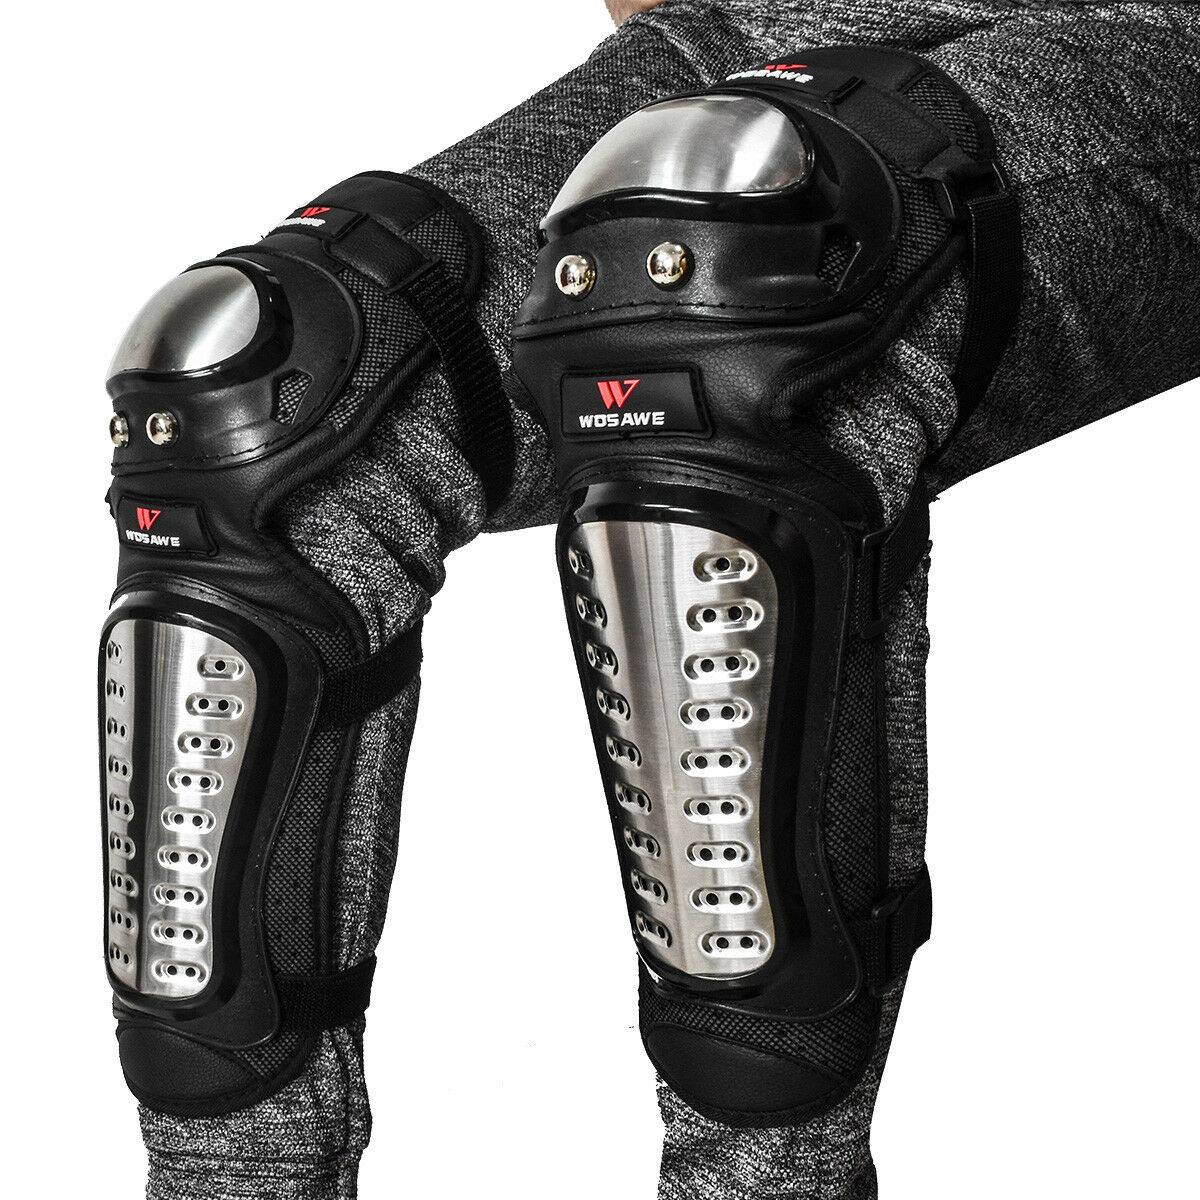 Adult Motorcycle Knee Guard Protective Equipment Protection - TDRMOTO